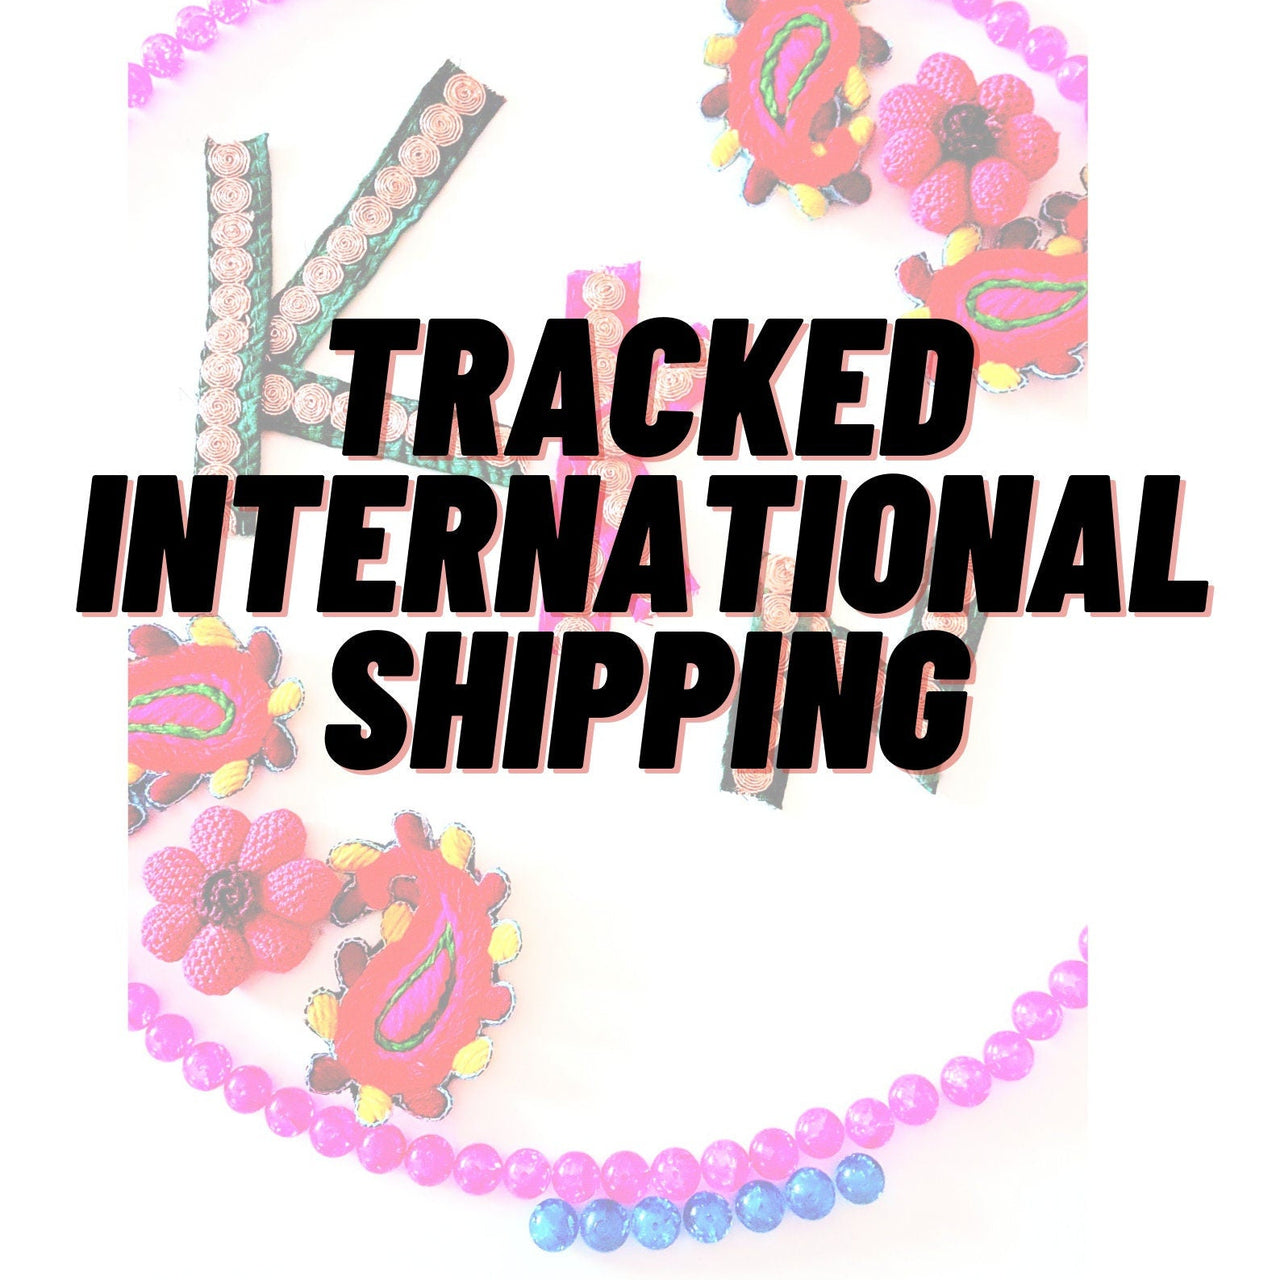 Tracked International Shipping - NON UK ONLY